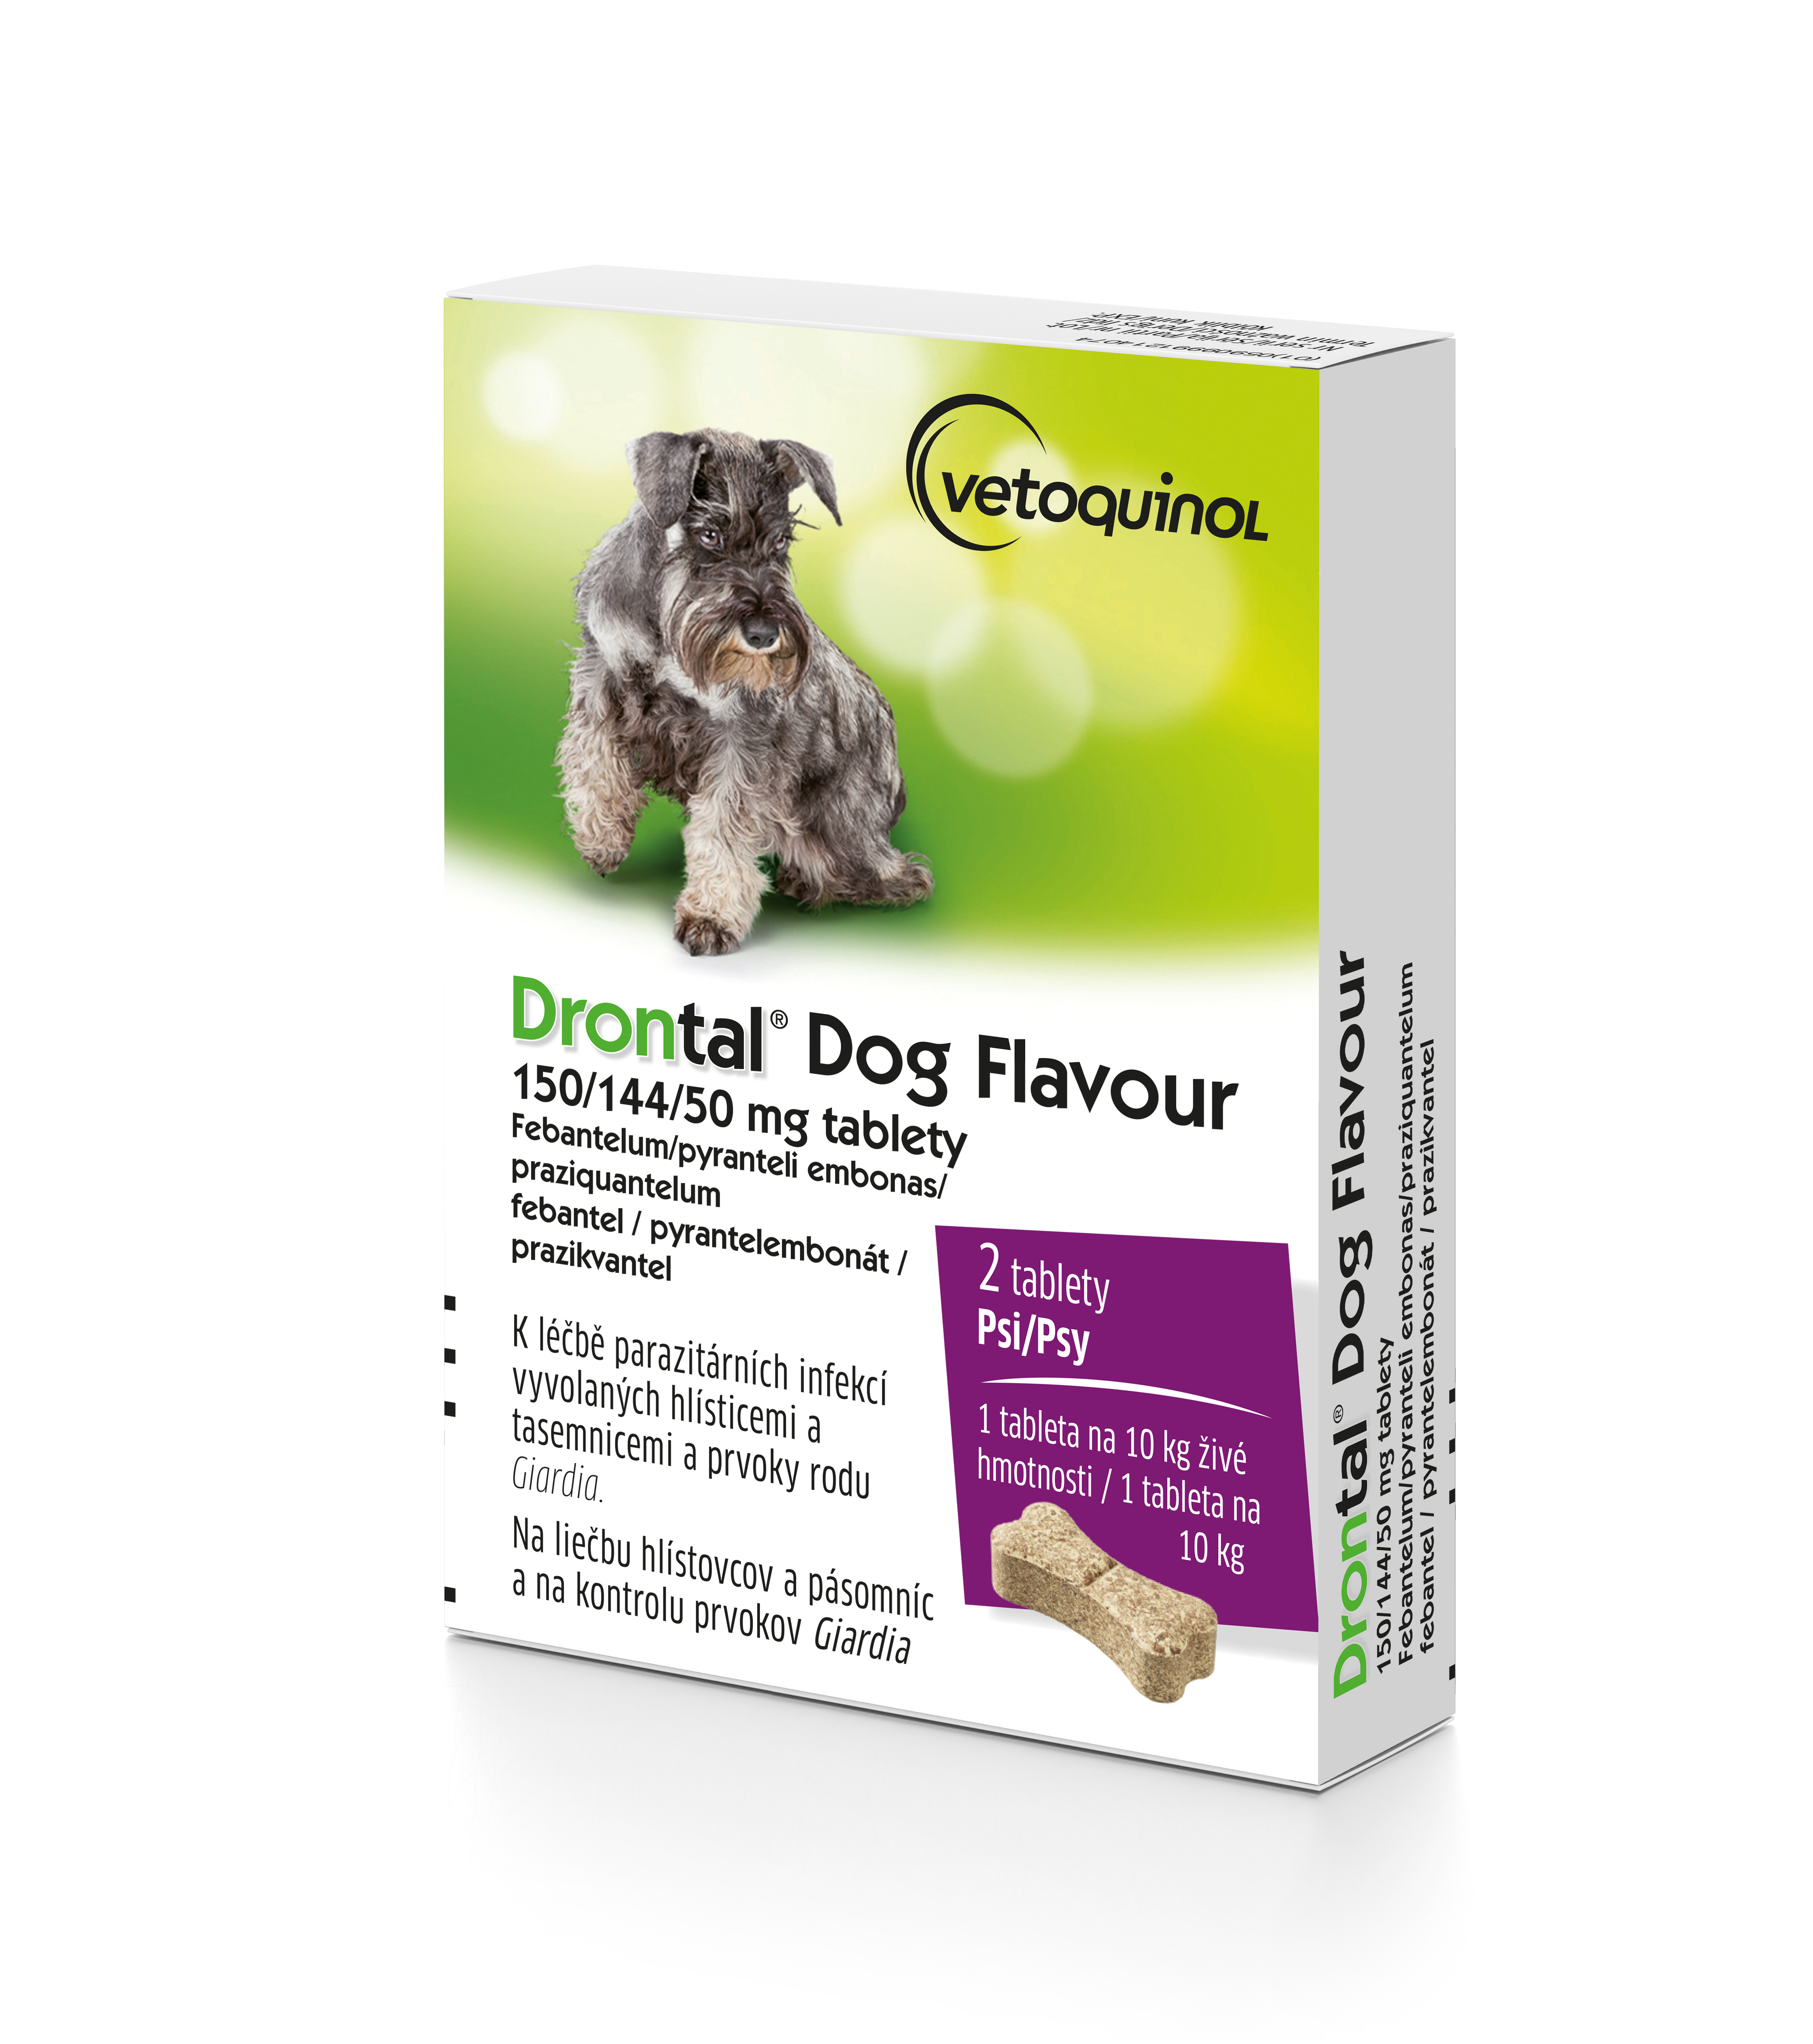 Drontal® Dog Flavour 150/144/50 mg tablety pre psy 